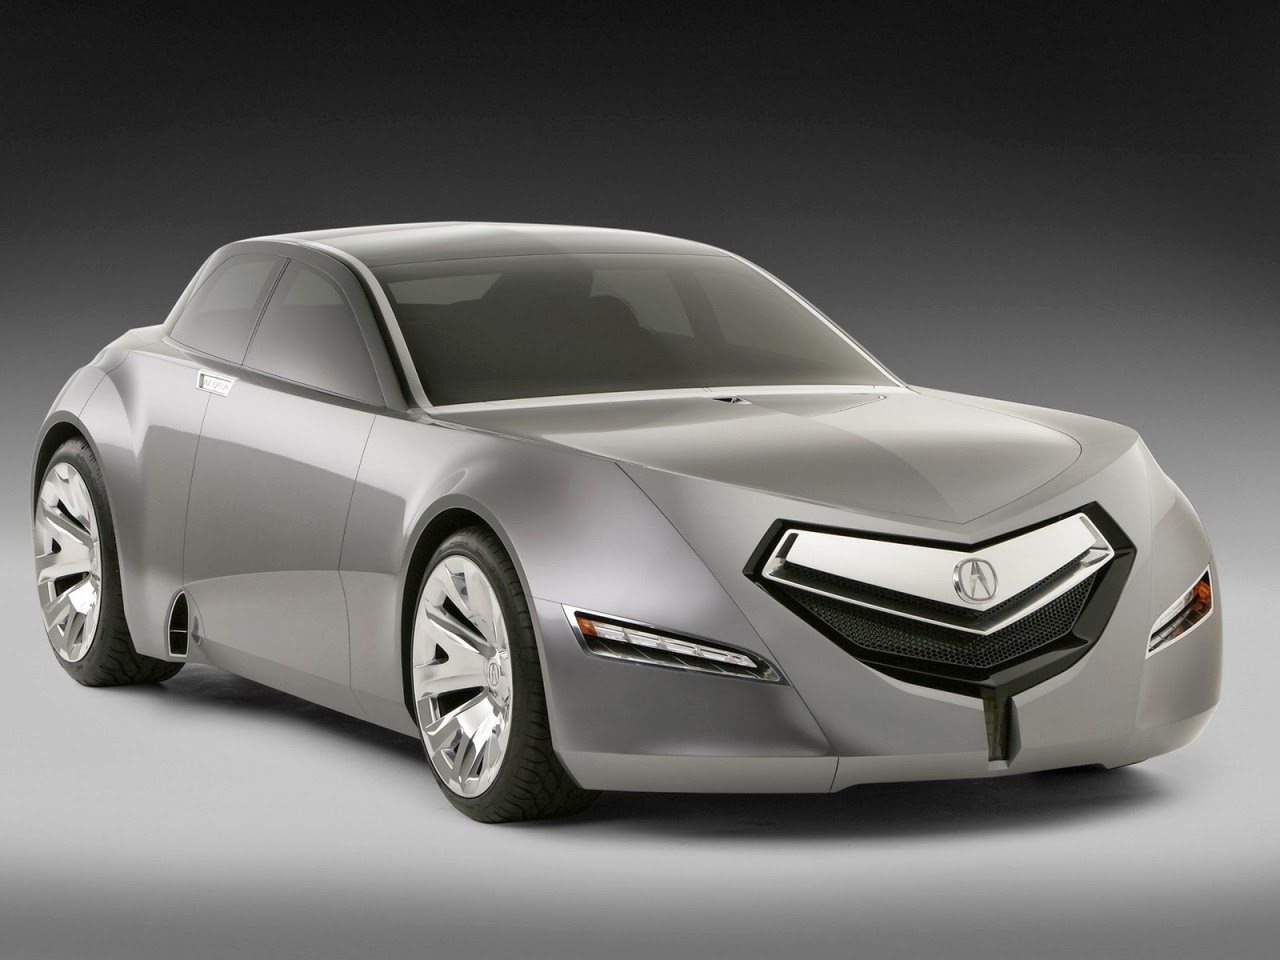 http://www.crazywallpapers.in/2014/02/acura-concept-pictures.html